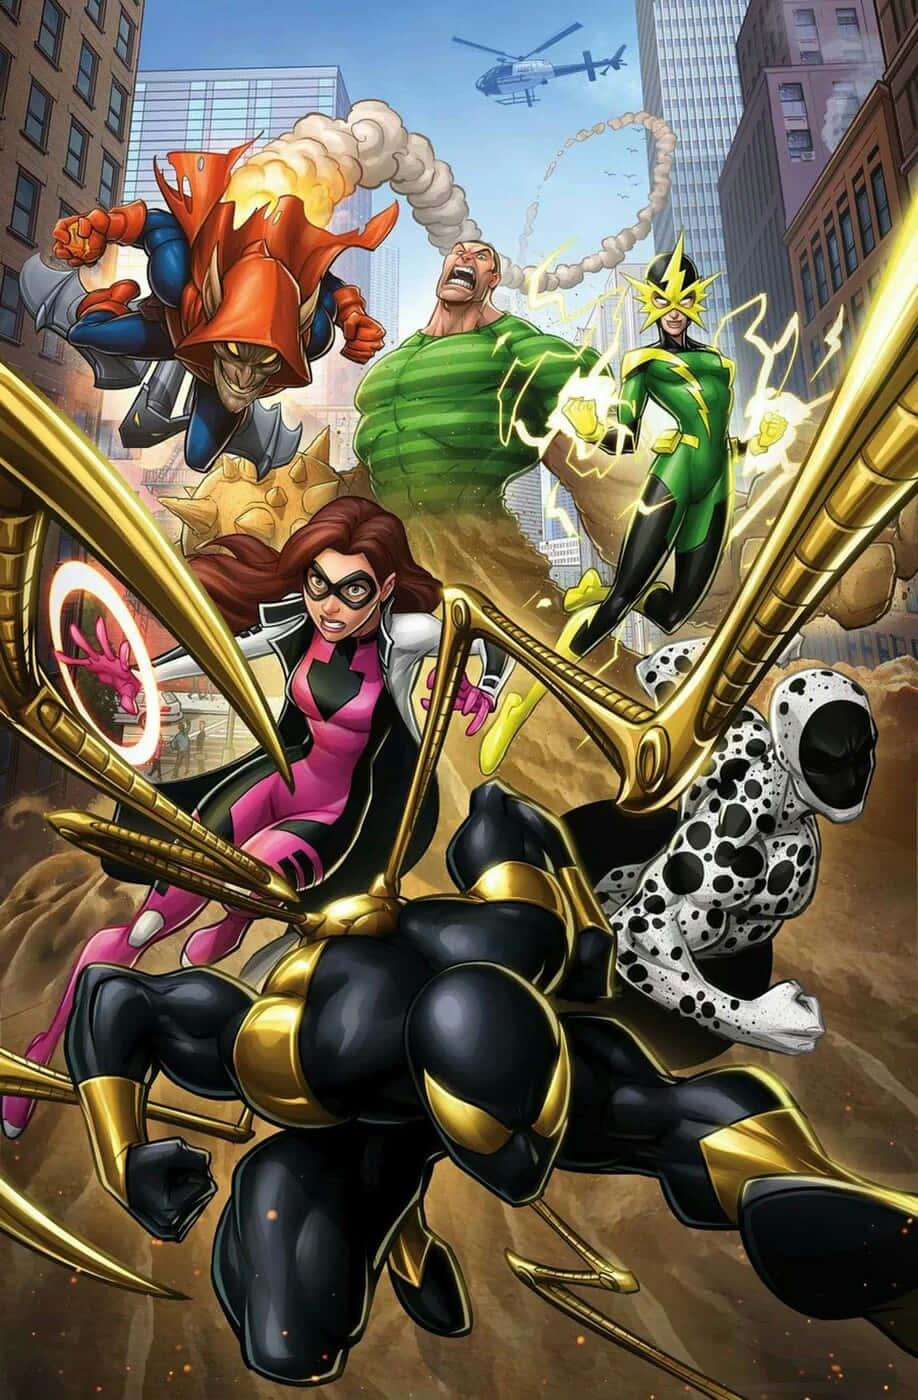 Image Caption: The Sinister Six Ready for Action Wallpaper